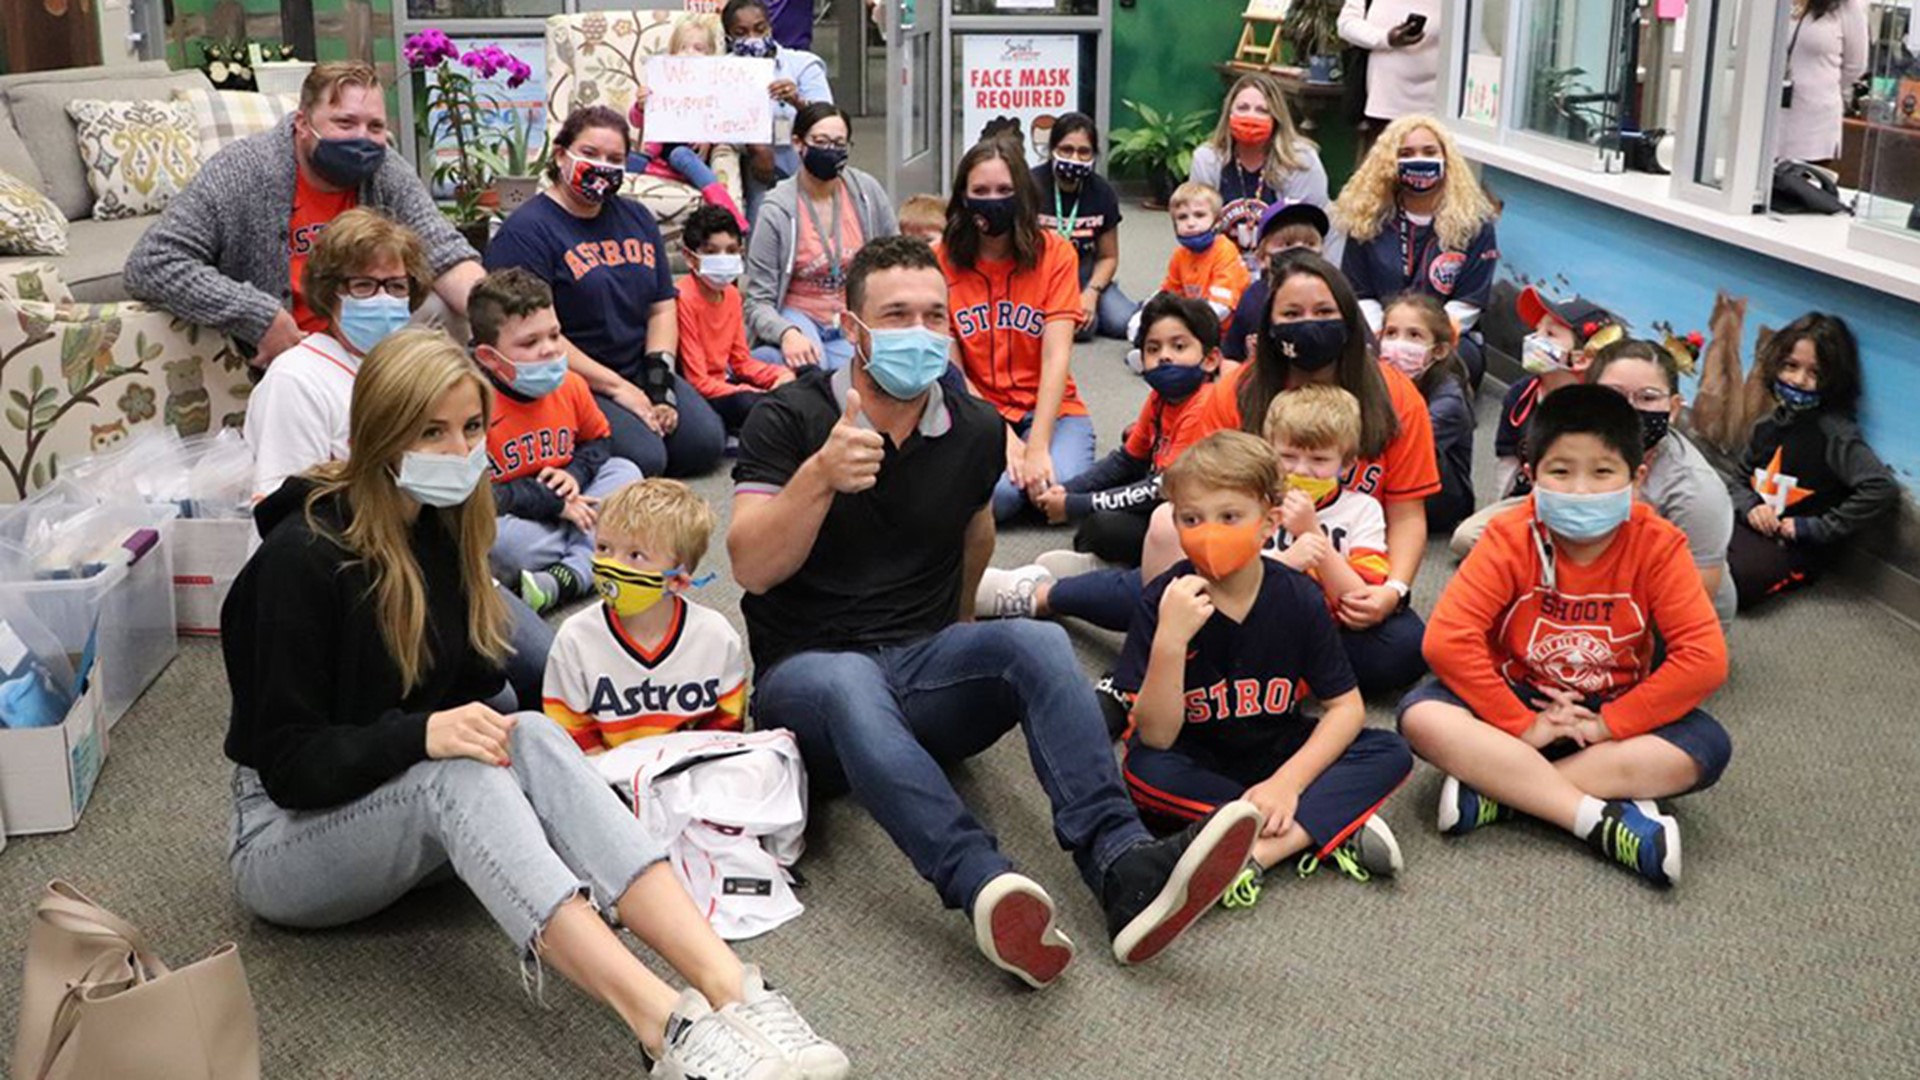 Astros third baseman Alex Bregman knocked it out of the park with Katy ISD students when he dropped off dozens of free iPads donated by his charity.